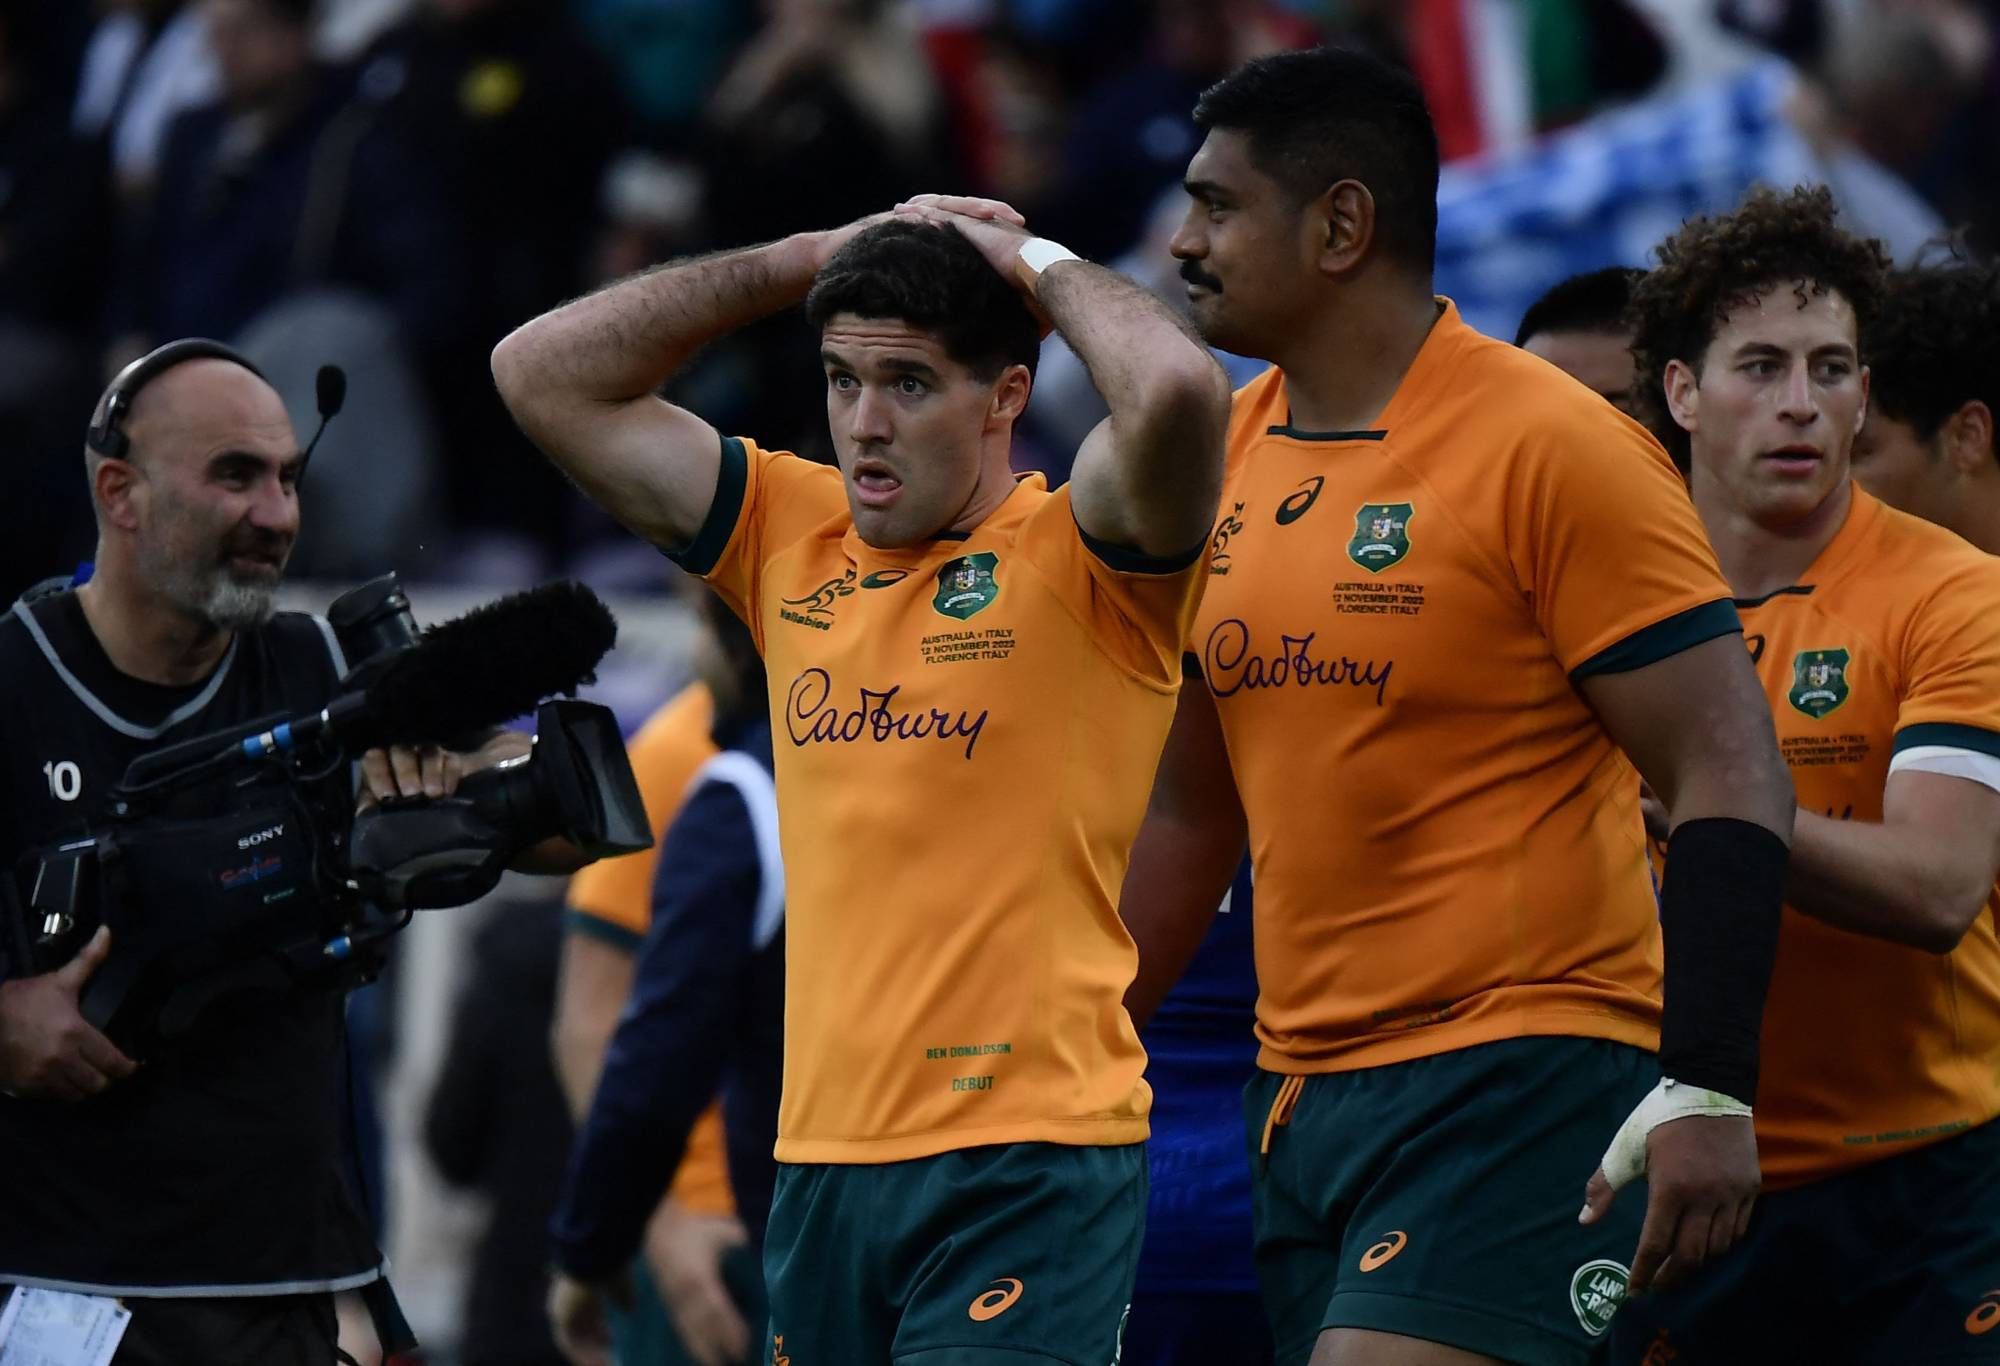 Australia's fly-half Ben Donaldson (C) reacts after missing a decisive penalty during the rugby union Test match between Italy and Australia on November 12, 2022 at the Artemio-Franchi stadium in Florence, Tuscany. (Photo by Filippo MONTEFORTE / AFP) (Photo by FILIPPO MONTEFORTE/AFP via Getty Images)